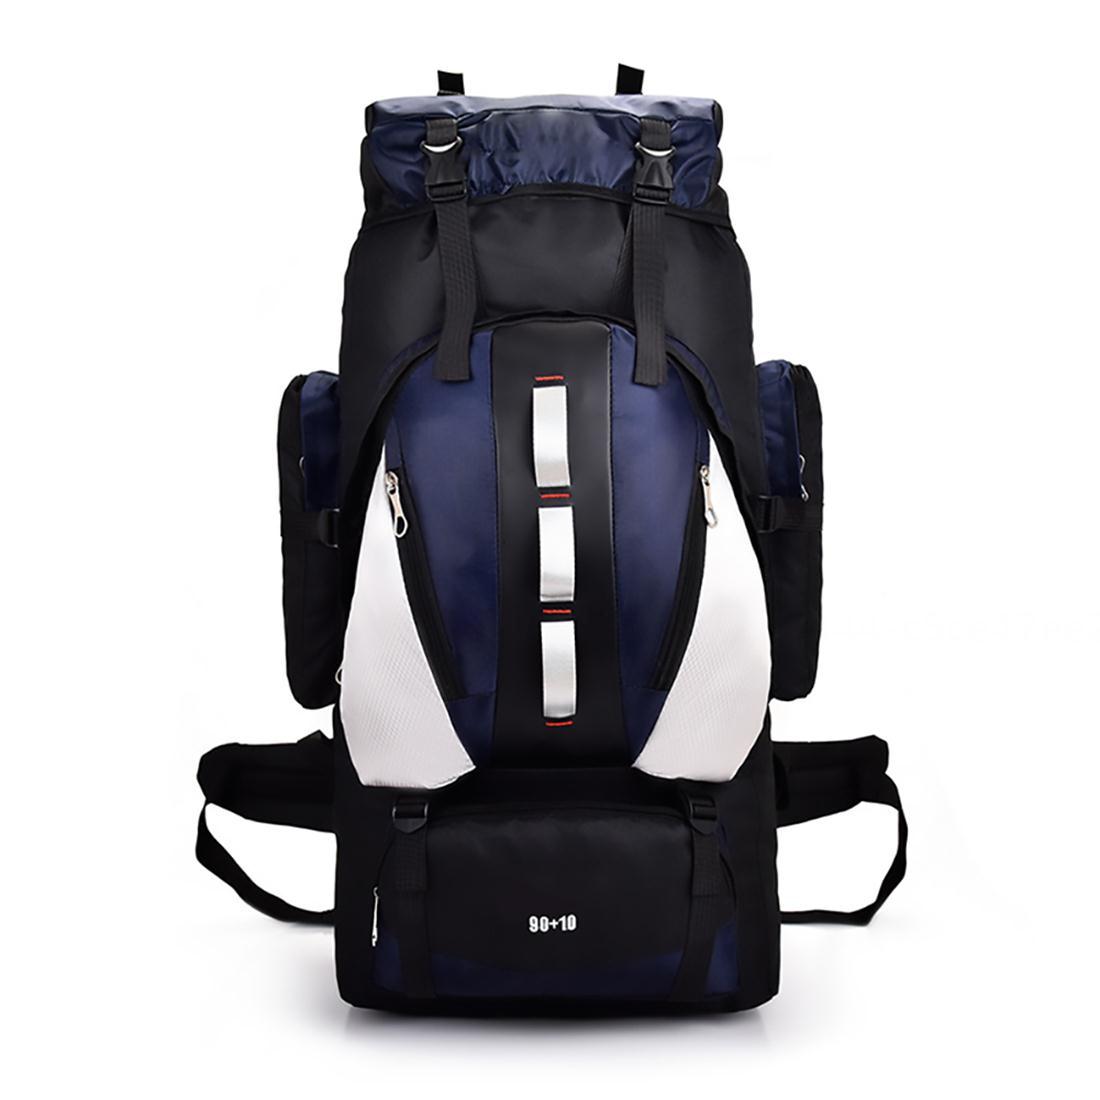 Backpack - 90L Hiking Backpack Waterproof Internal Frame Backpack Large Hiking Mountaineering Backpack, Free Rain Cover for Men and Women Outdoors.Dark Blue - image 1 of 9